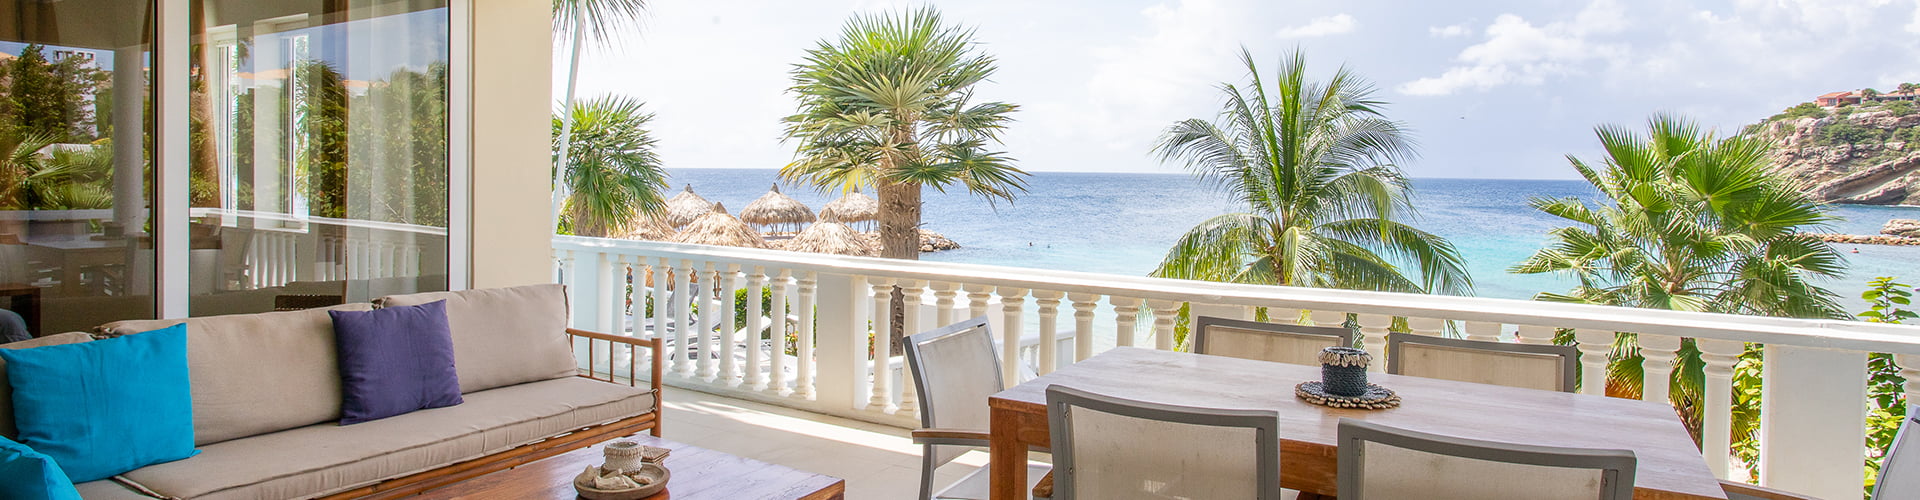 Rent holiday homes Curacao that are wheelchair friendly